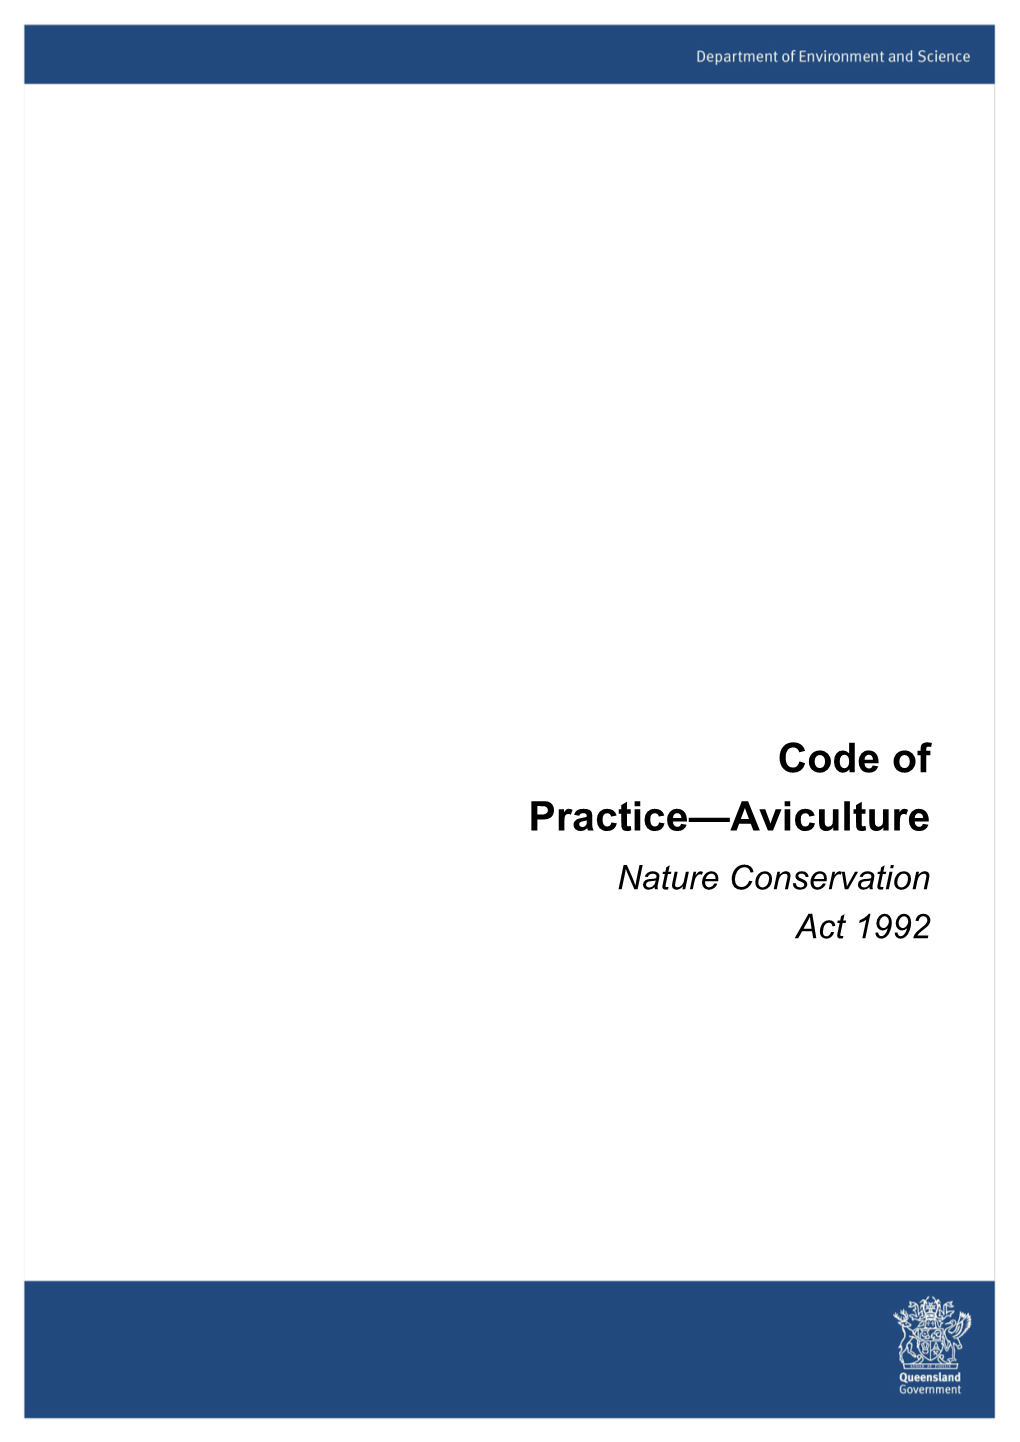 Aviculture Nature Conservation Act 1992